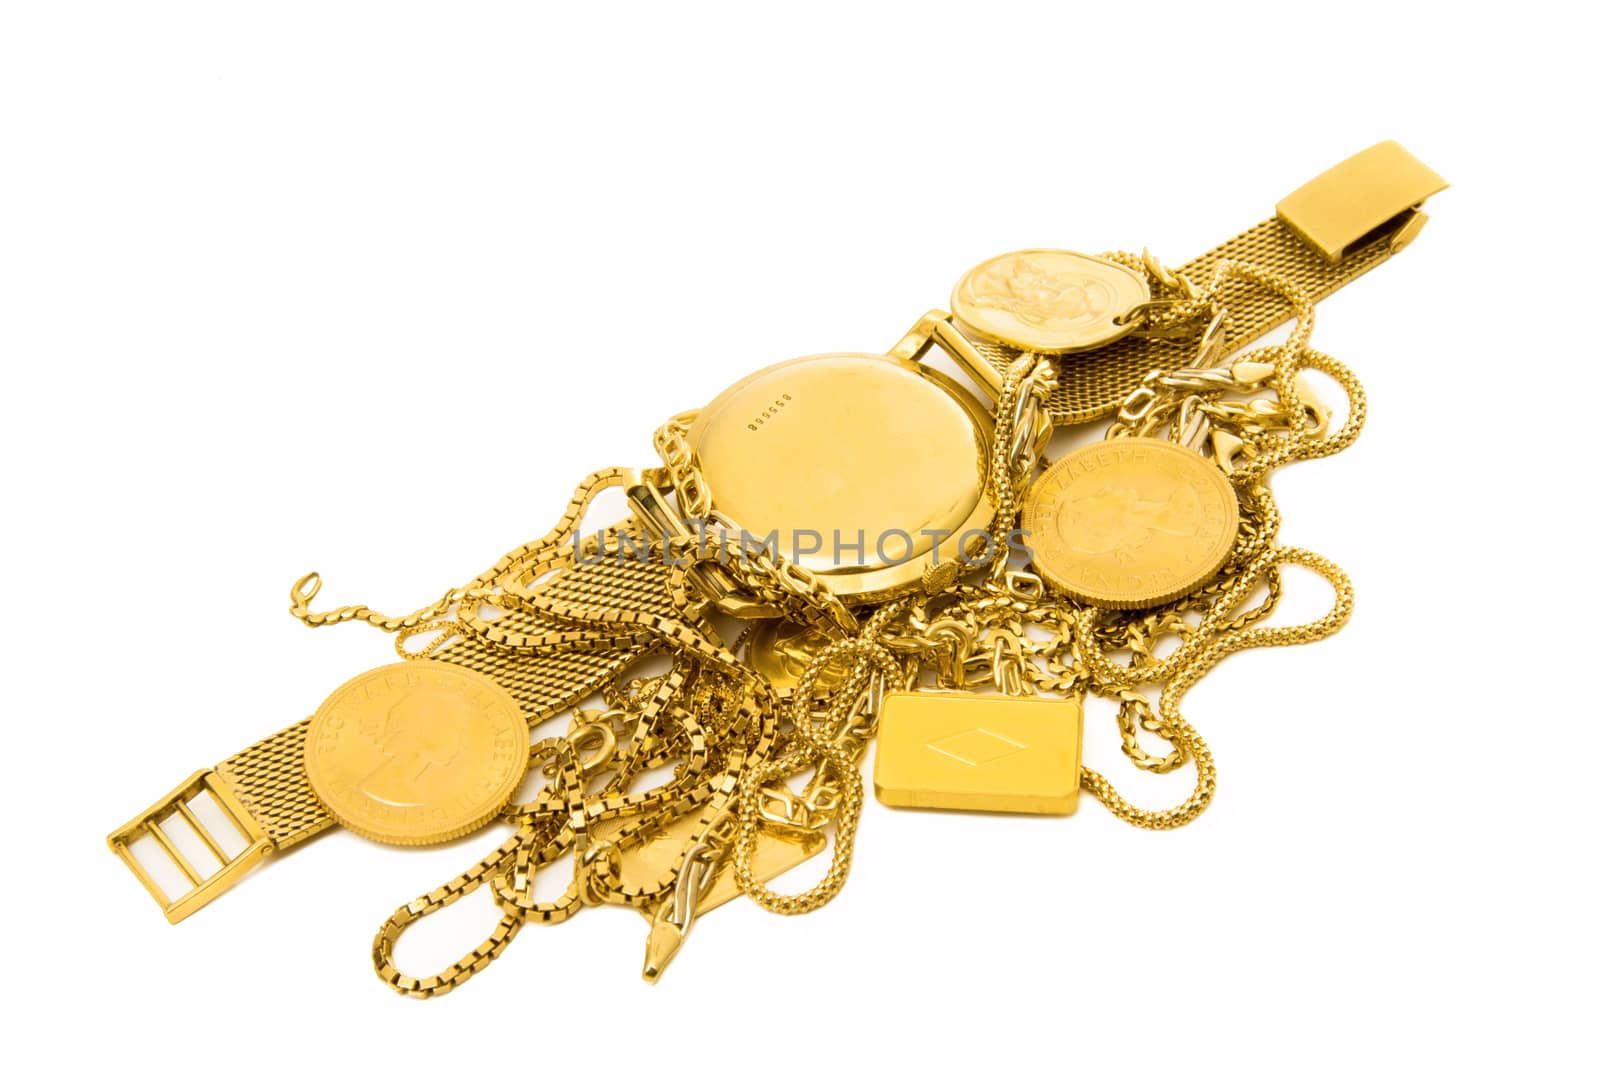 precious gold objects on white background